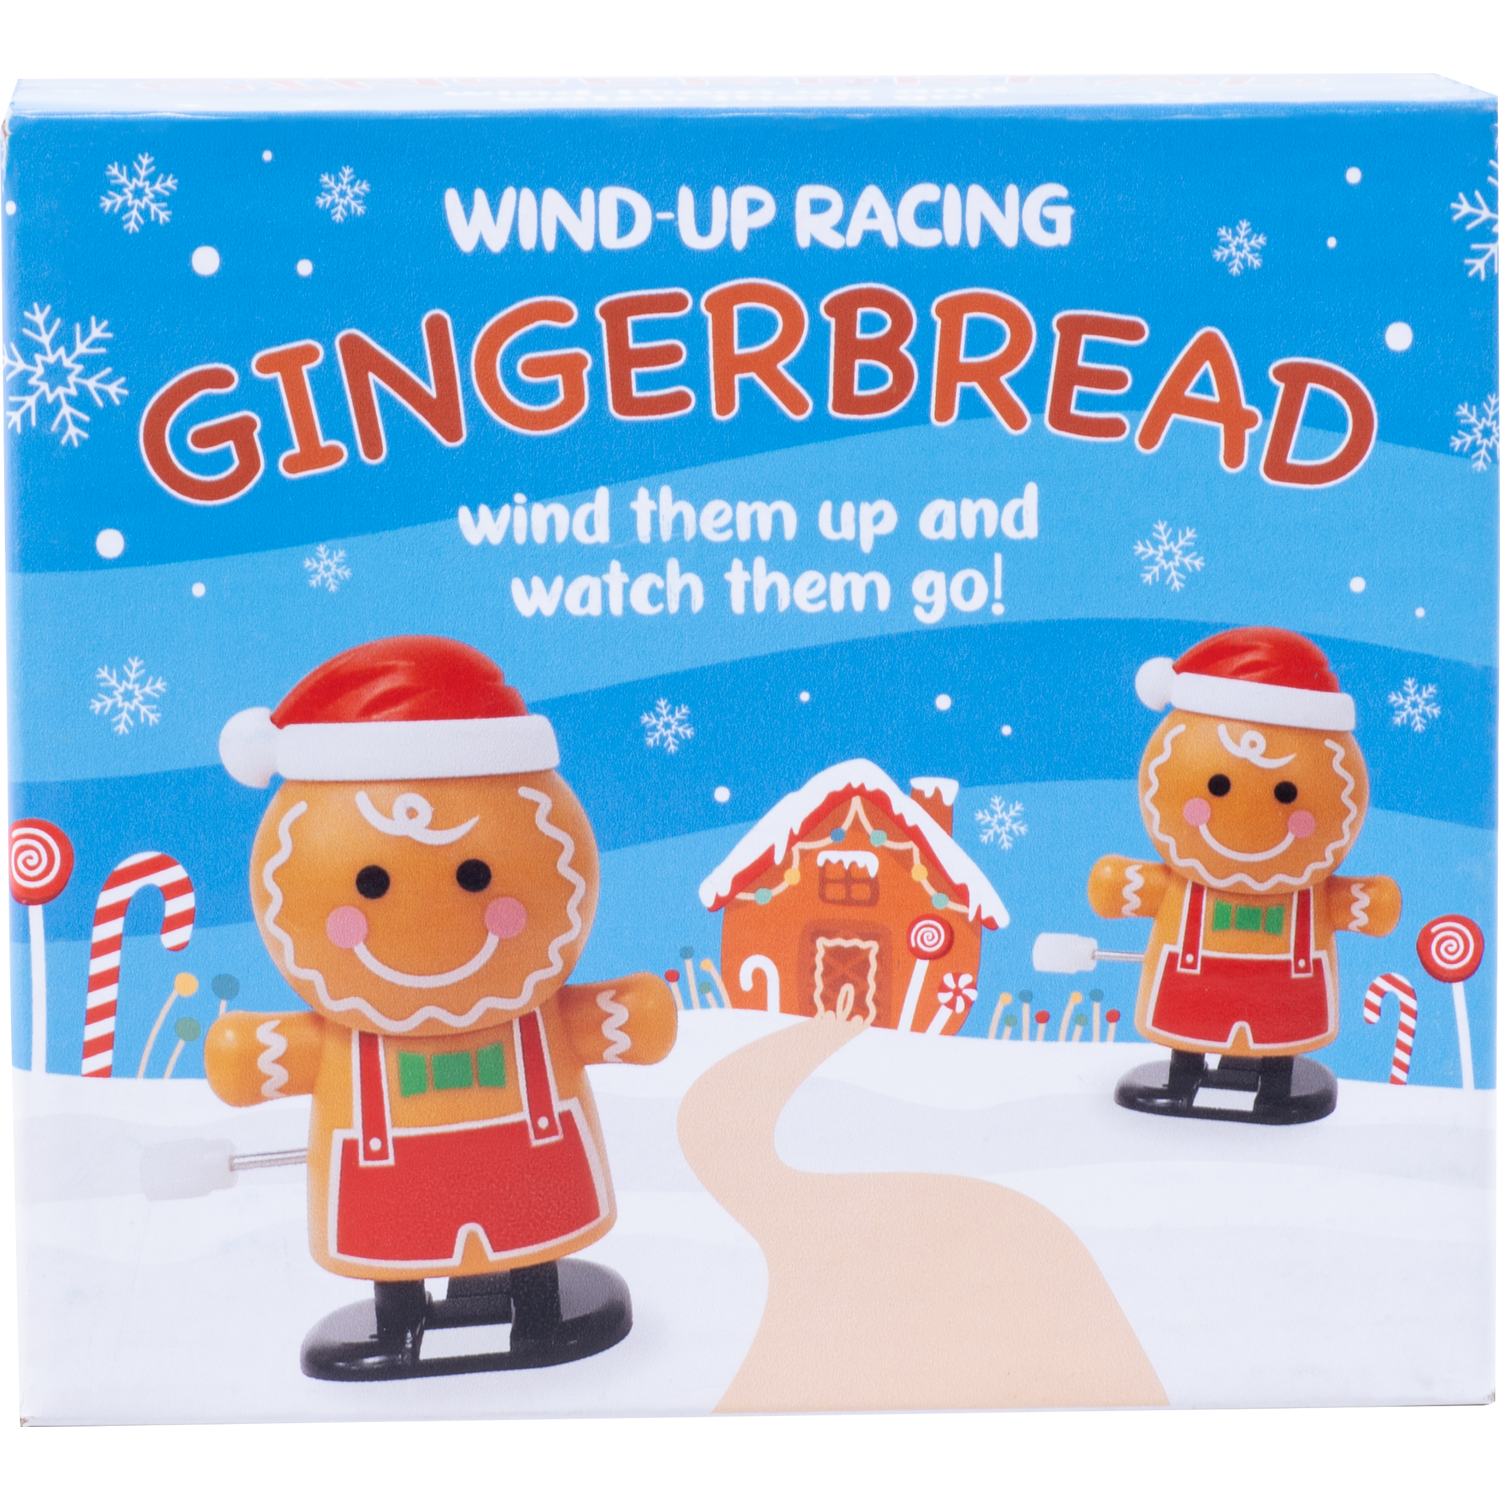 Wind-Up Racing Gingerbread Toy 2 Pack Image 1